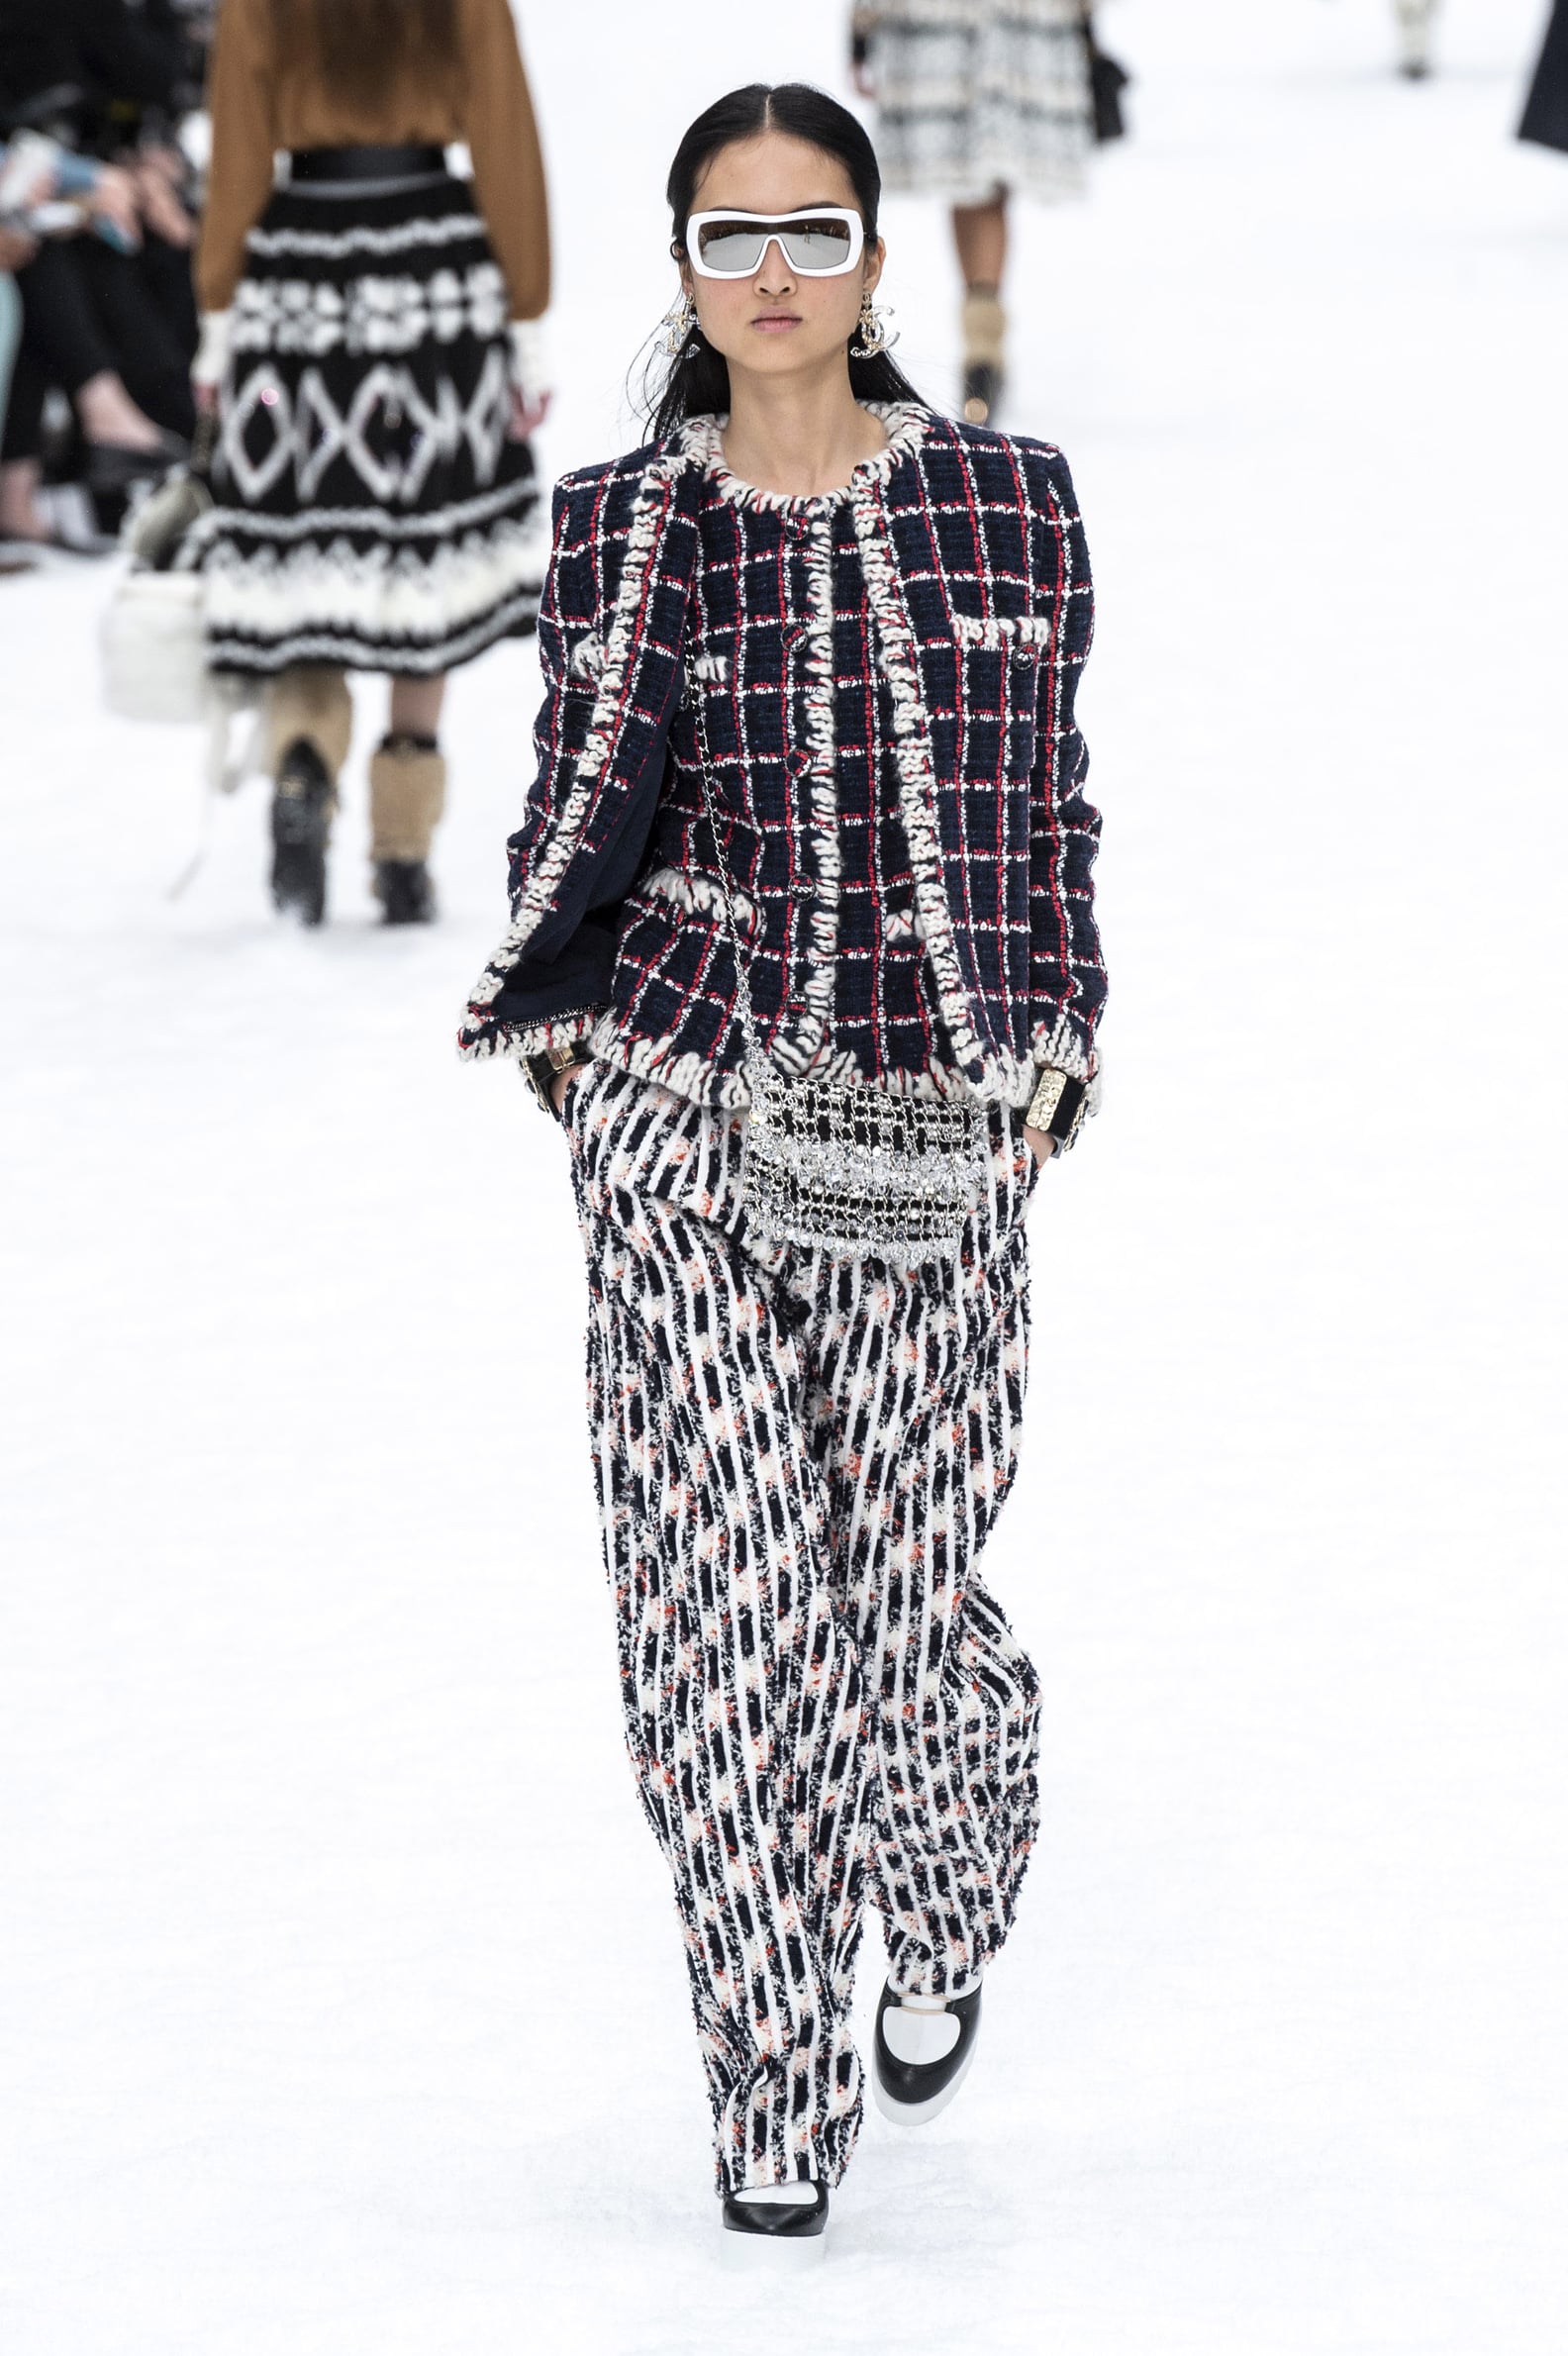 Chanel Fall 2019 Runway Pictures | POPSUGAR Fashion